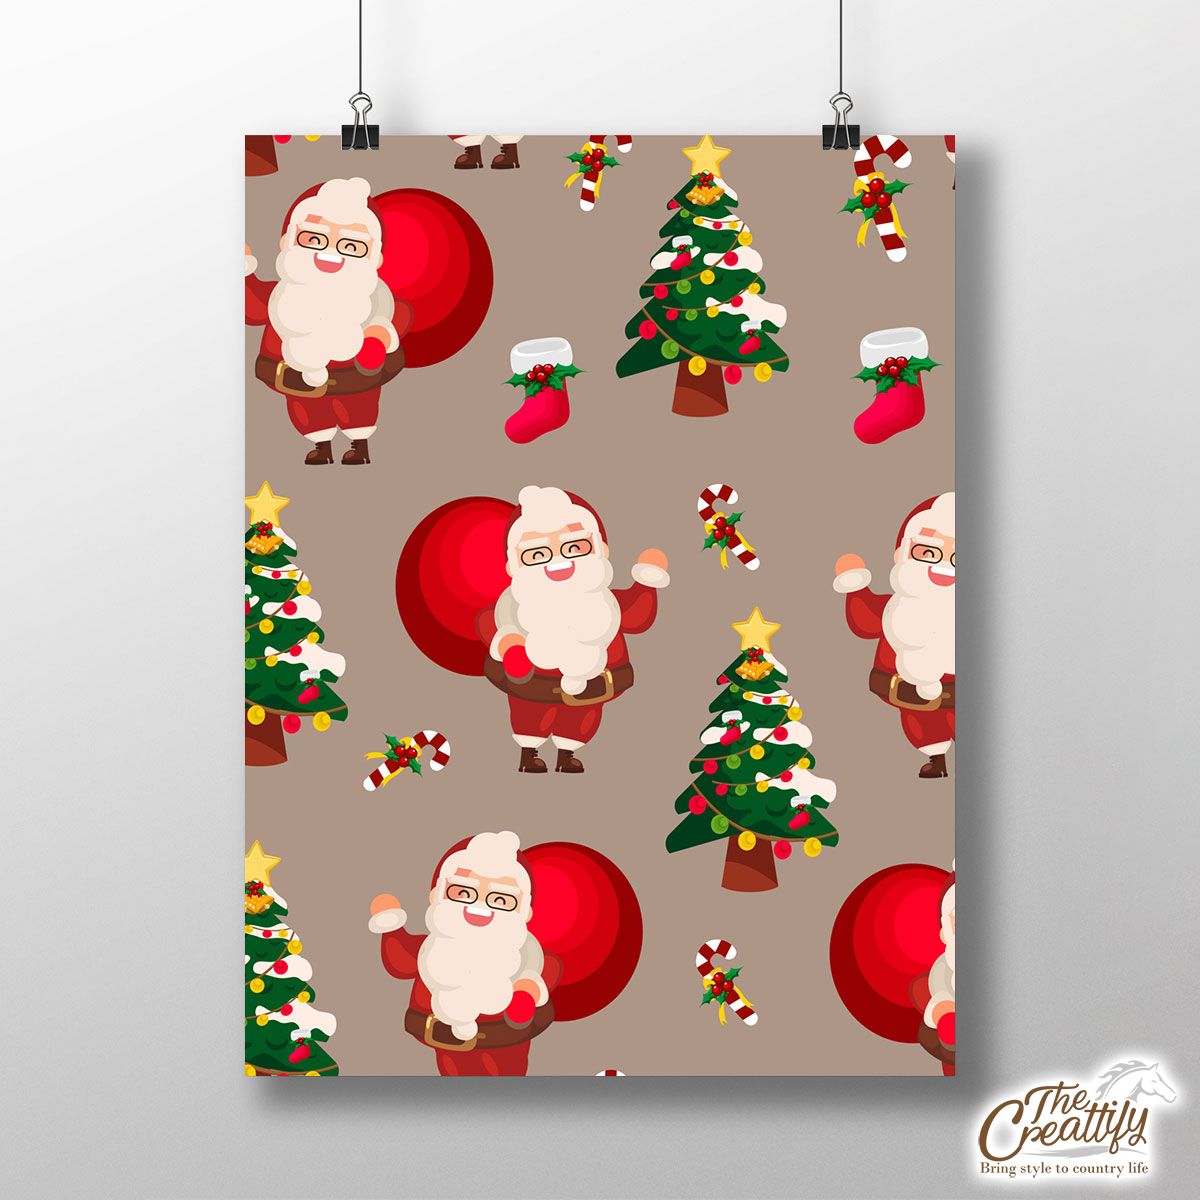 Santa Clause, Chritmas Tree, Candy Cane On Brown Background Poster